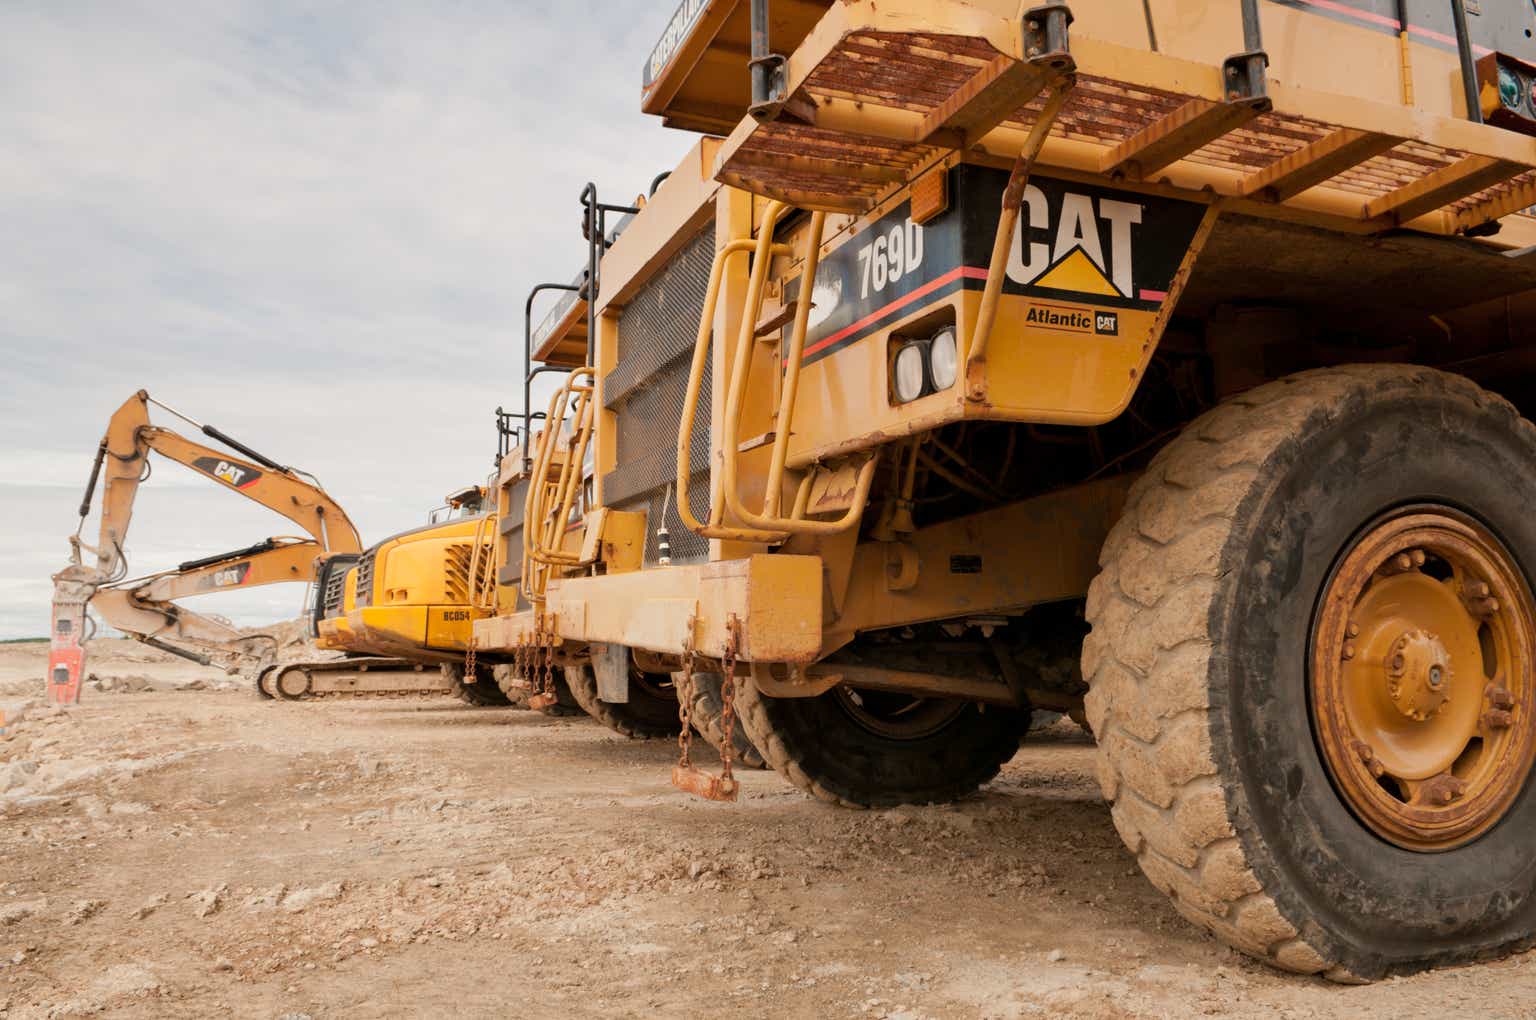 Caterpillar Stock Falls After Company Smashed Earnings. What's